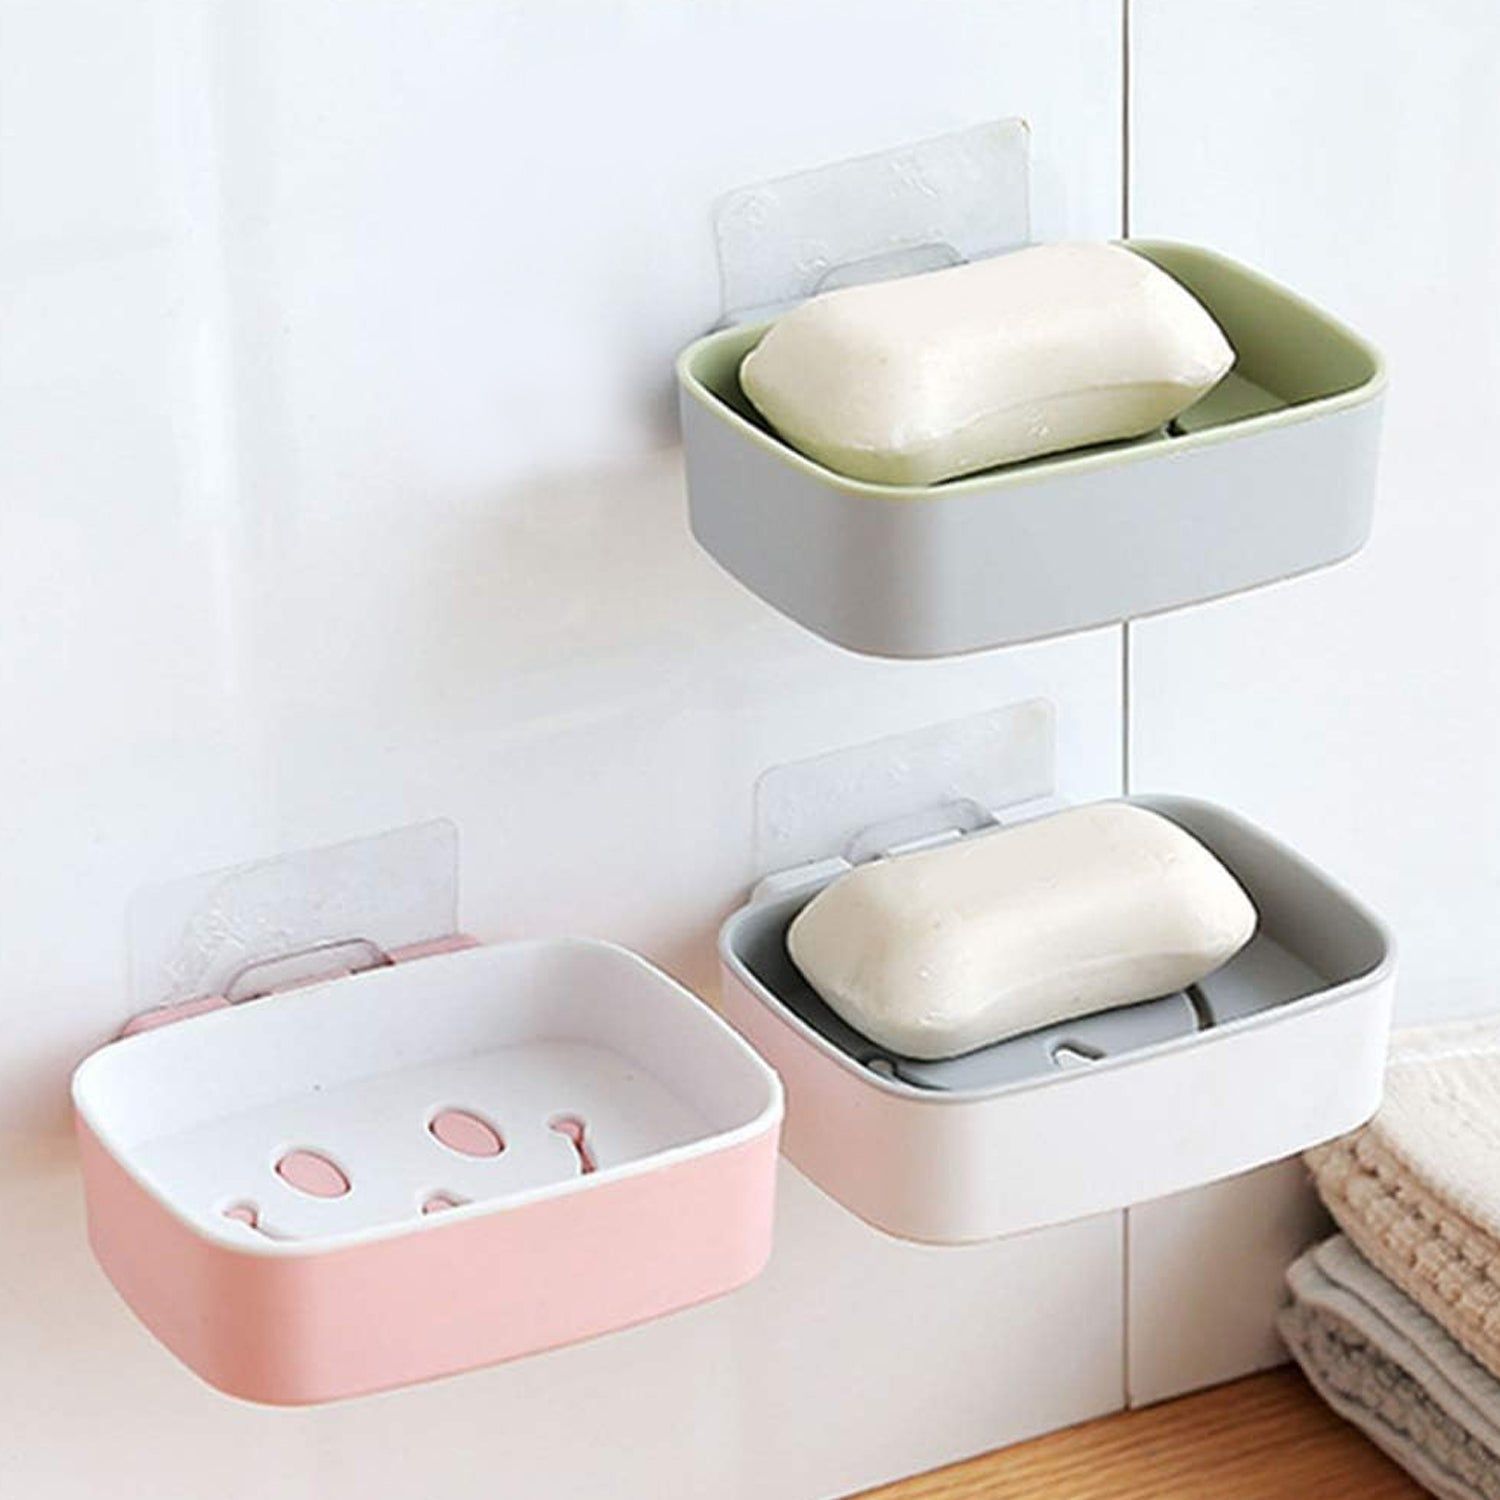 Soap Dish with Drain Soap Holder, Soap Saver Easy Cleaning, Soap Tray for Shower Bathroom Kitchen (1 Pc)-Wall Cartoon Soap Dish